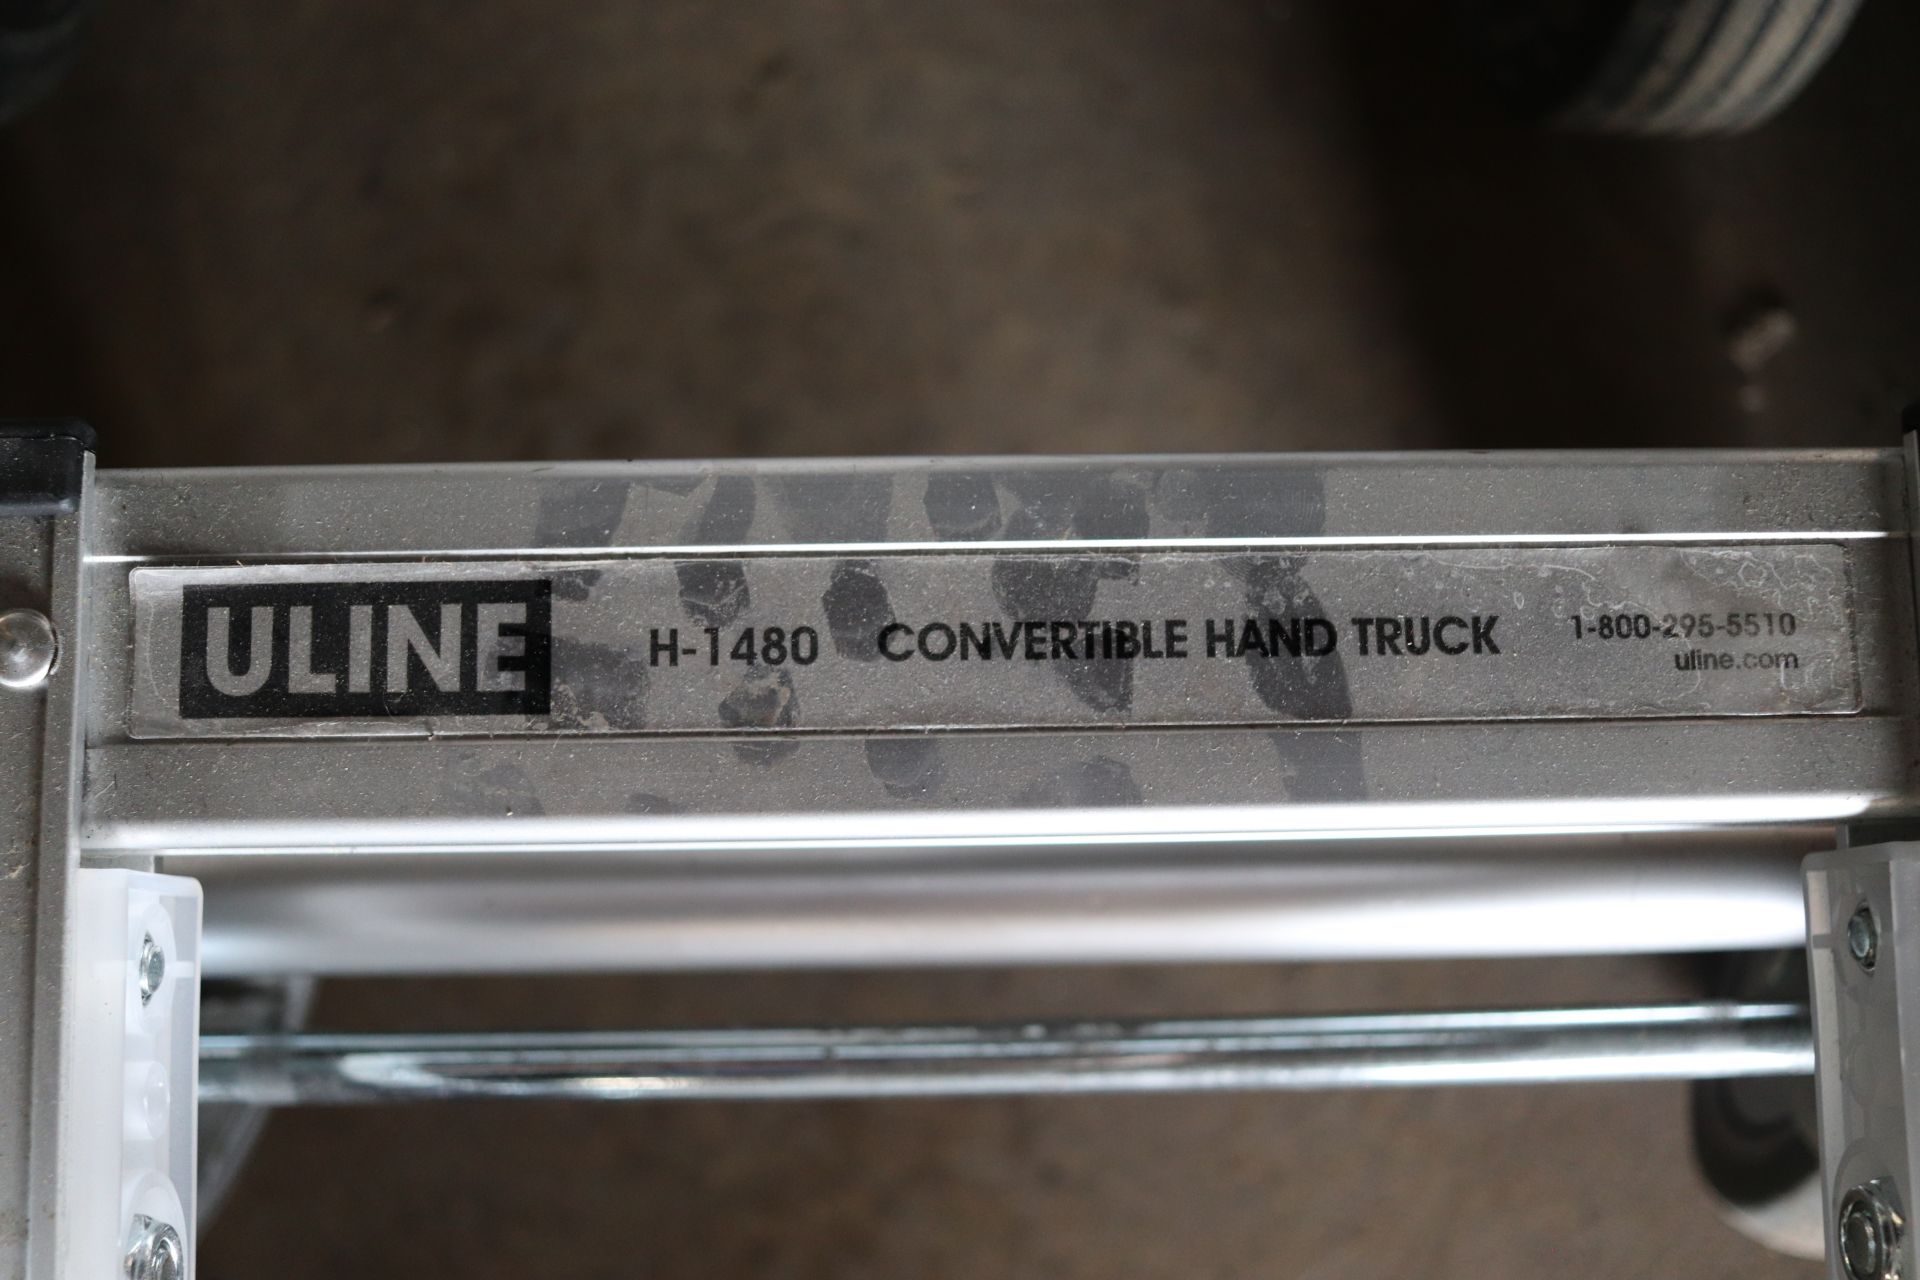 Uline convertible hand truck, H1480 - Image 2 of 2